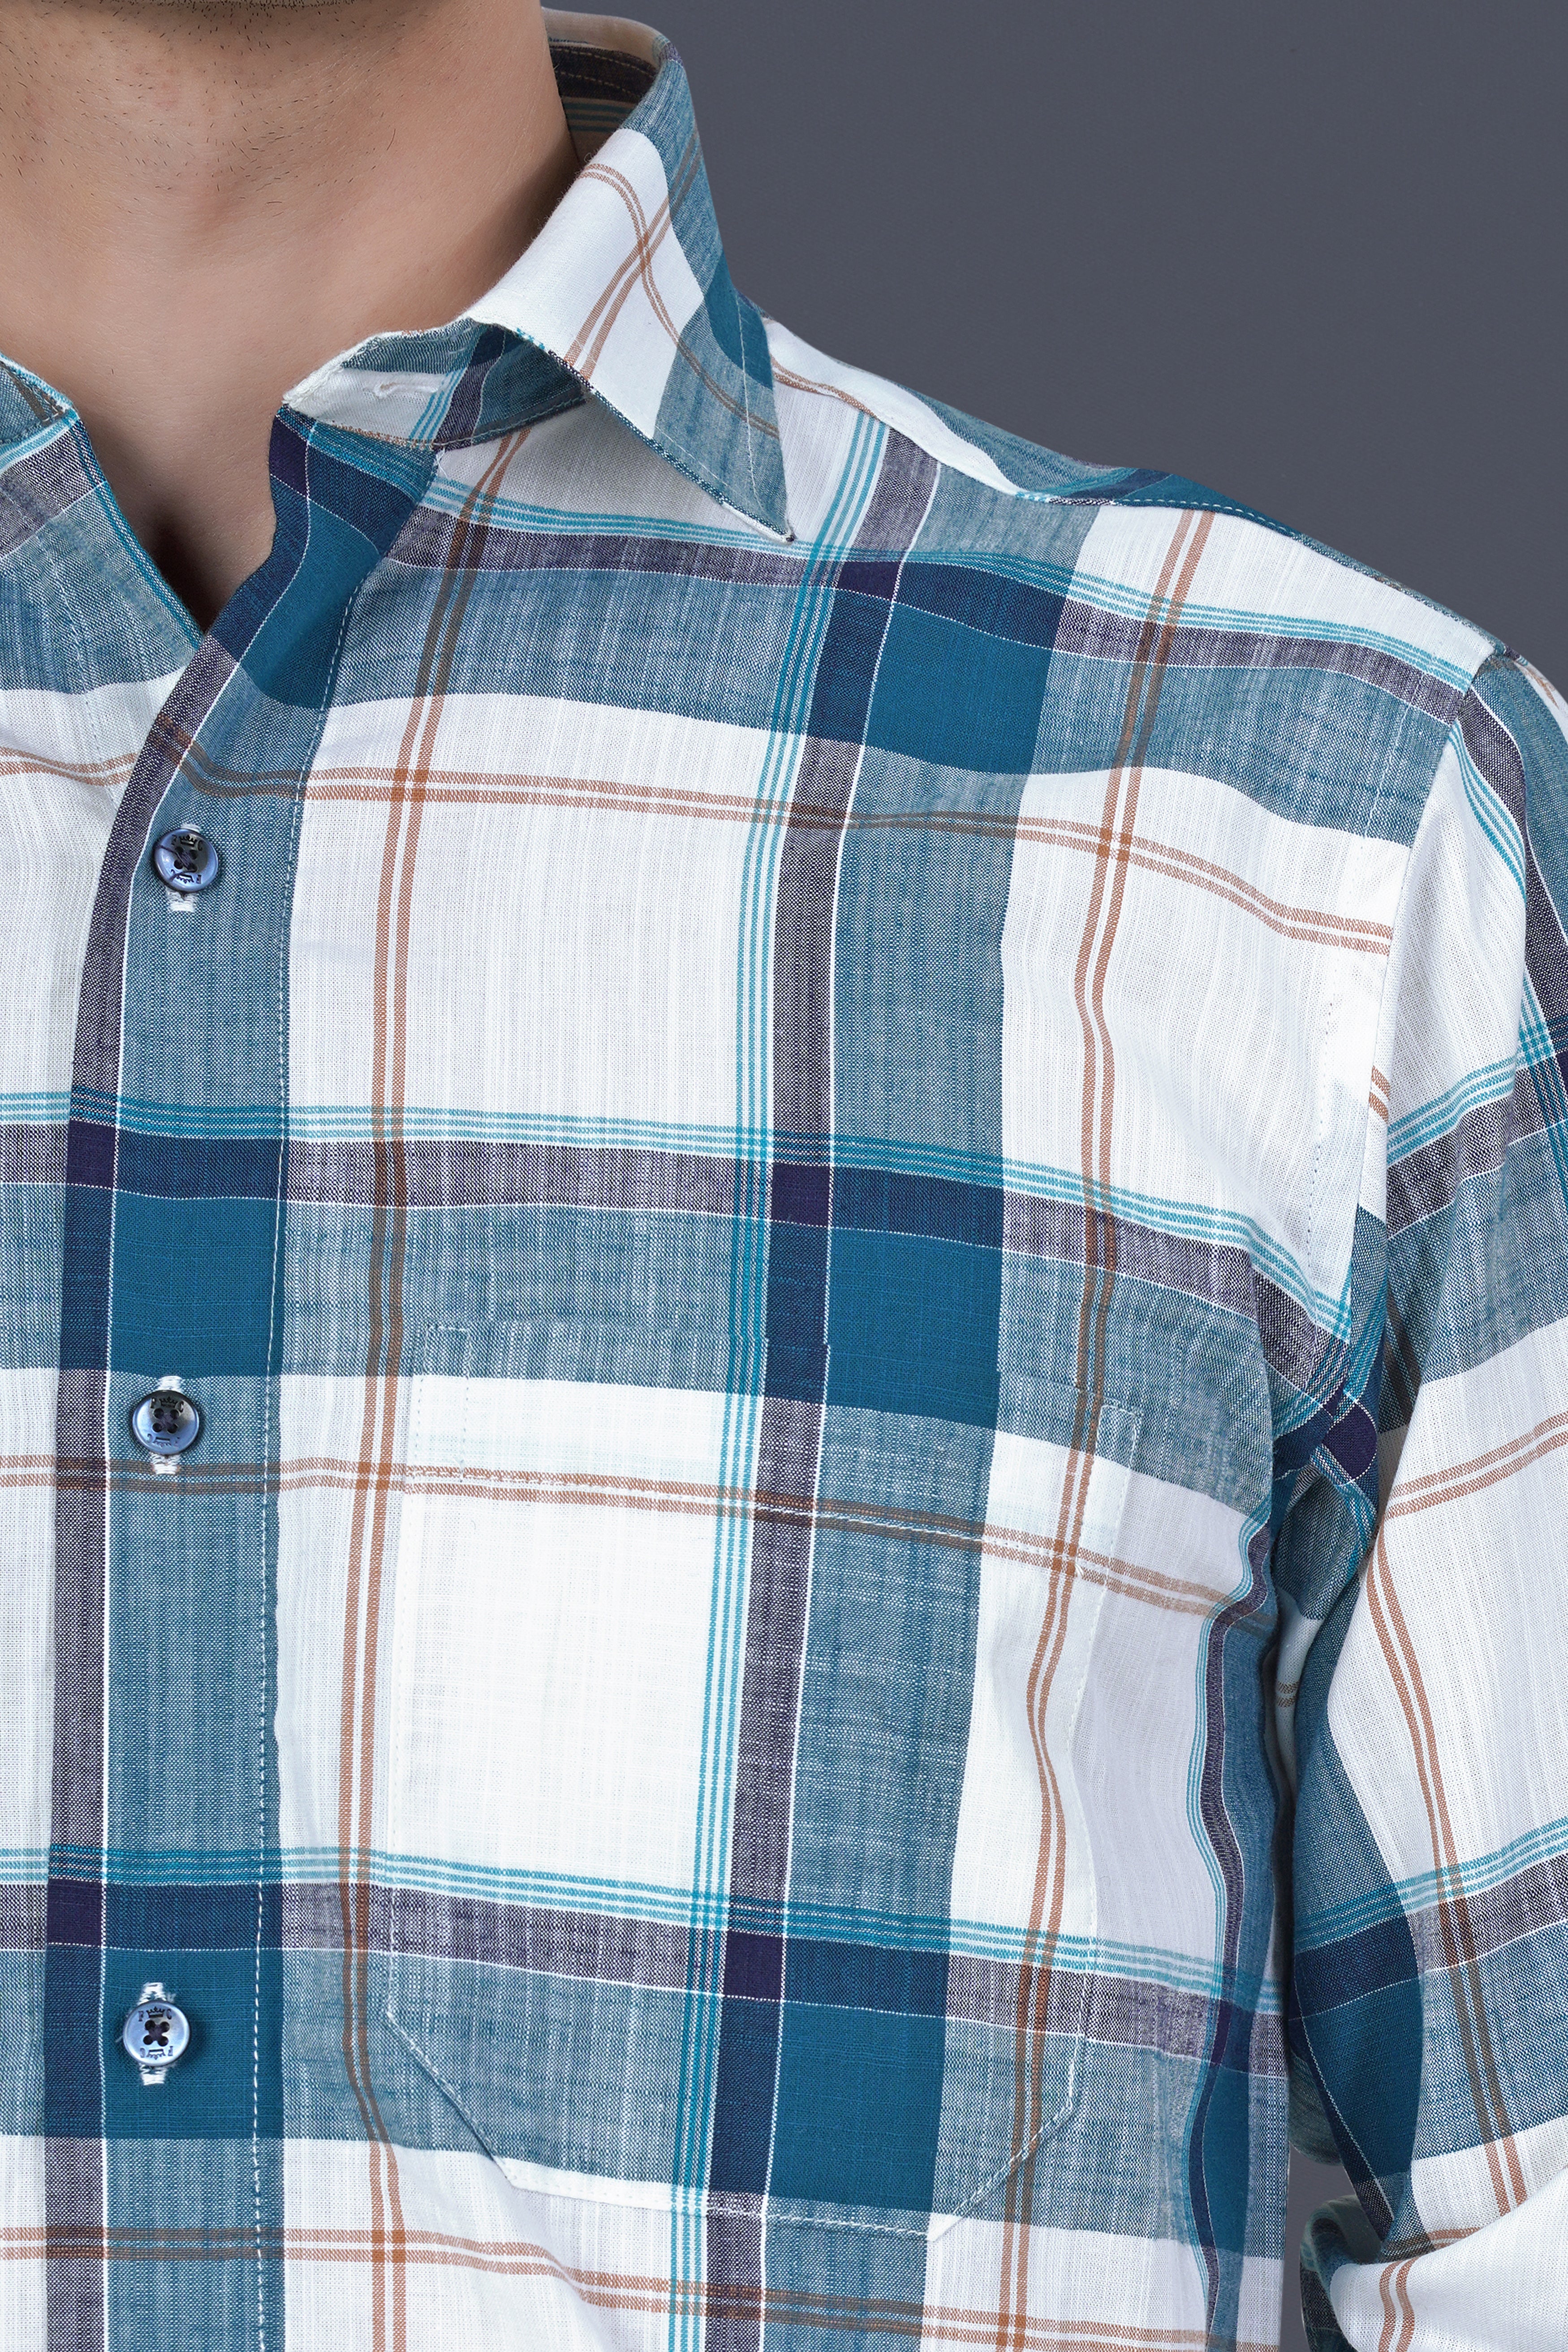 Bright White with Chathams Blue and Desert Brown Plaid Chambray Shirt